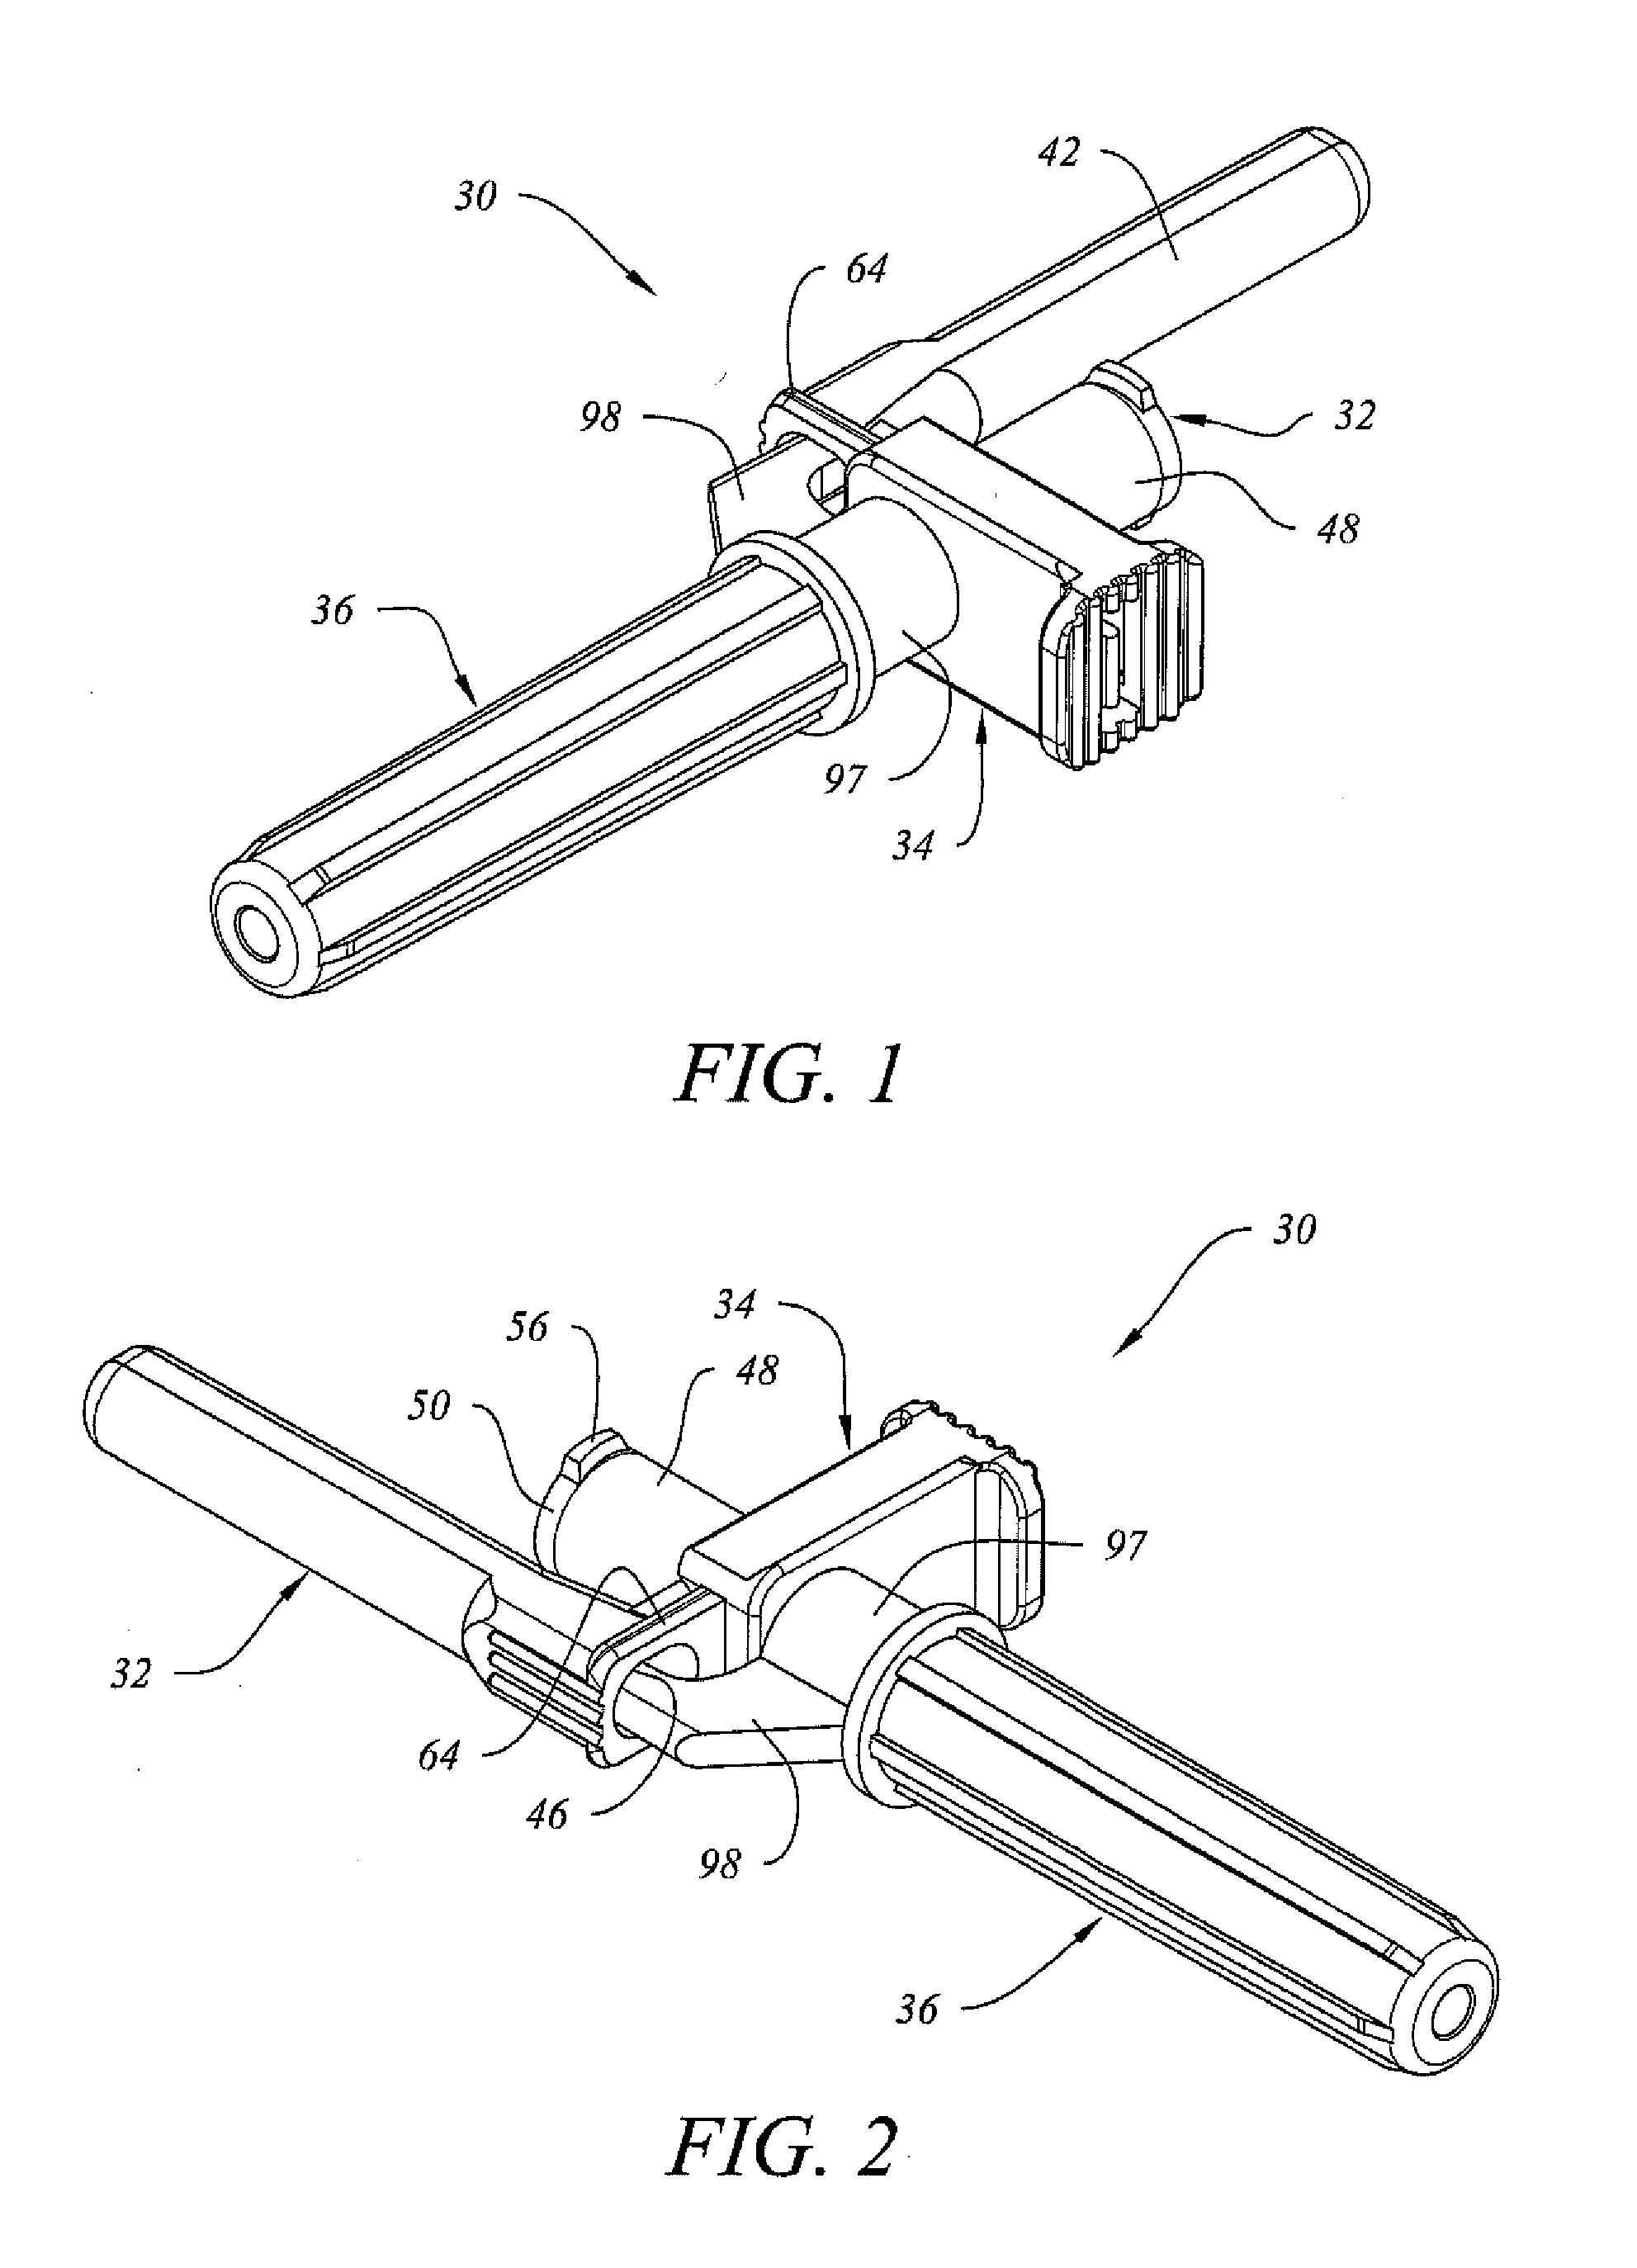 Combined Medical Device with Sliding Frontal Attachment and Retractable Needle